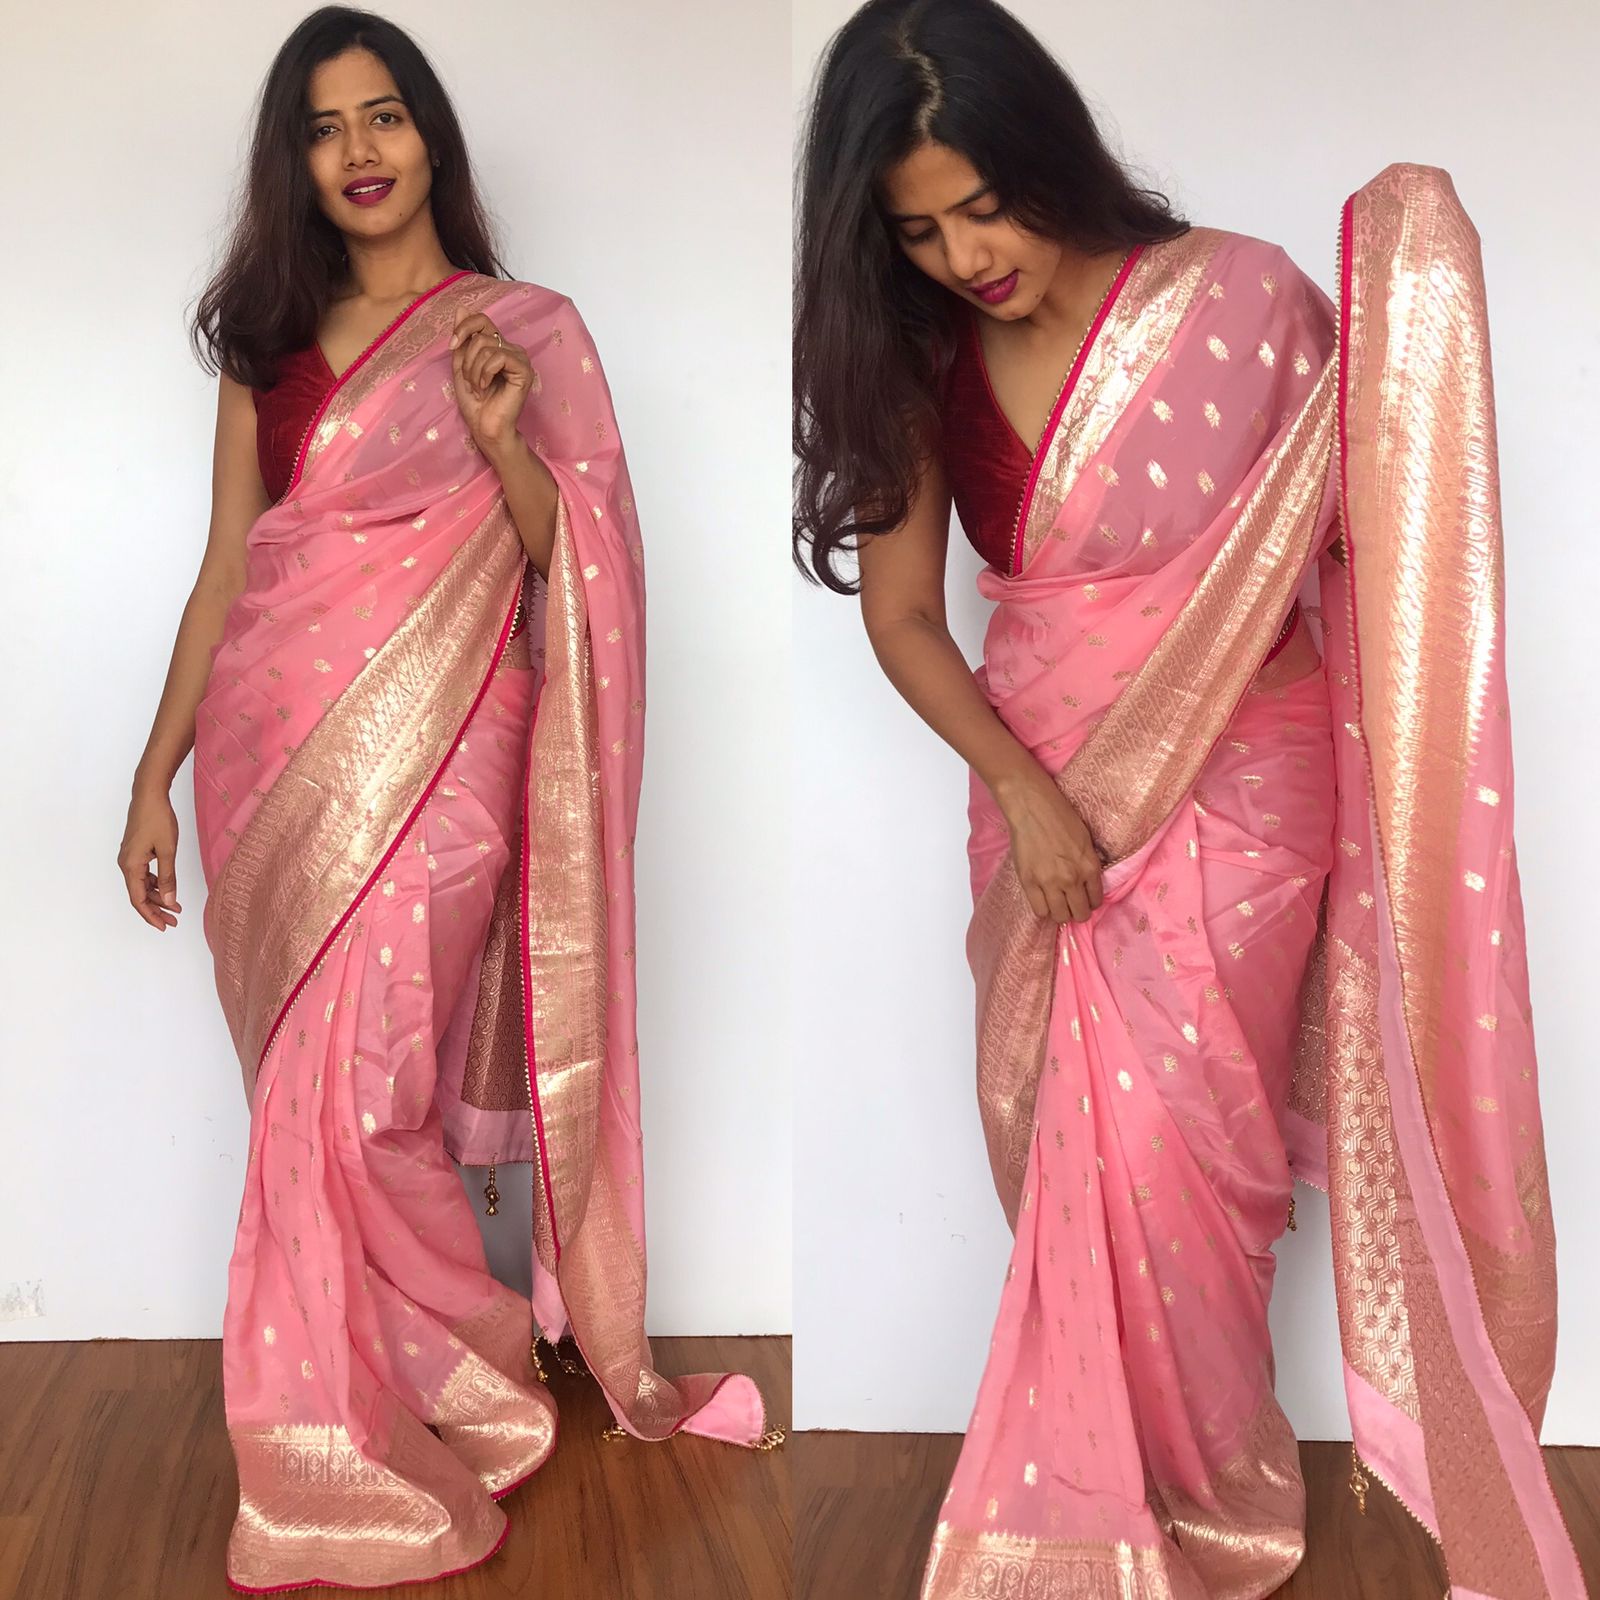 Sumbul Touqeer Khan's latest saree look makes us manifest her debut in South